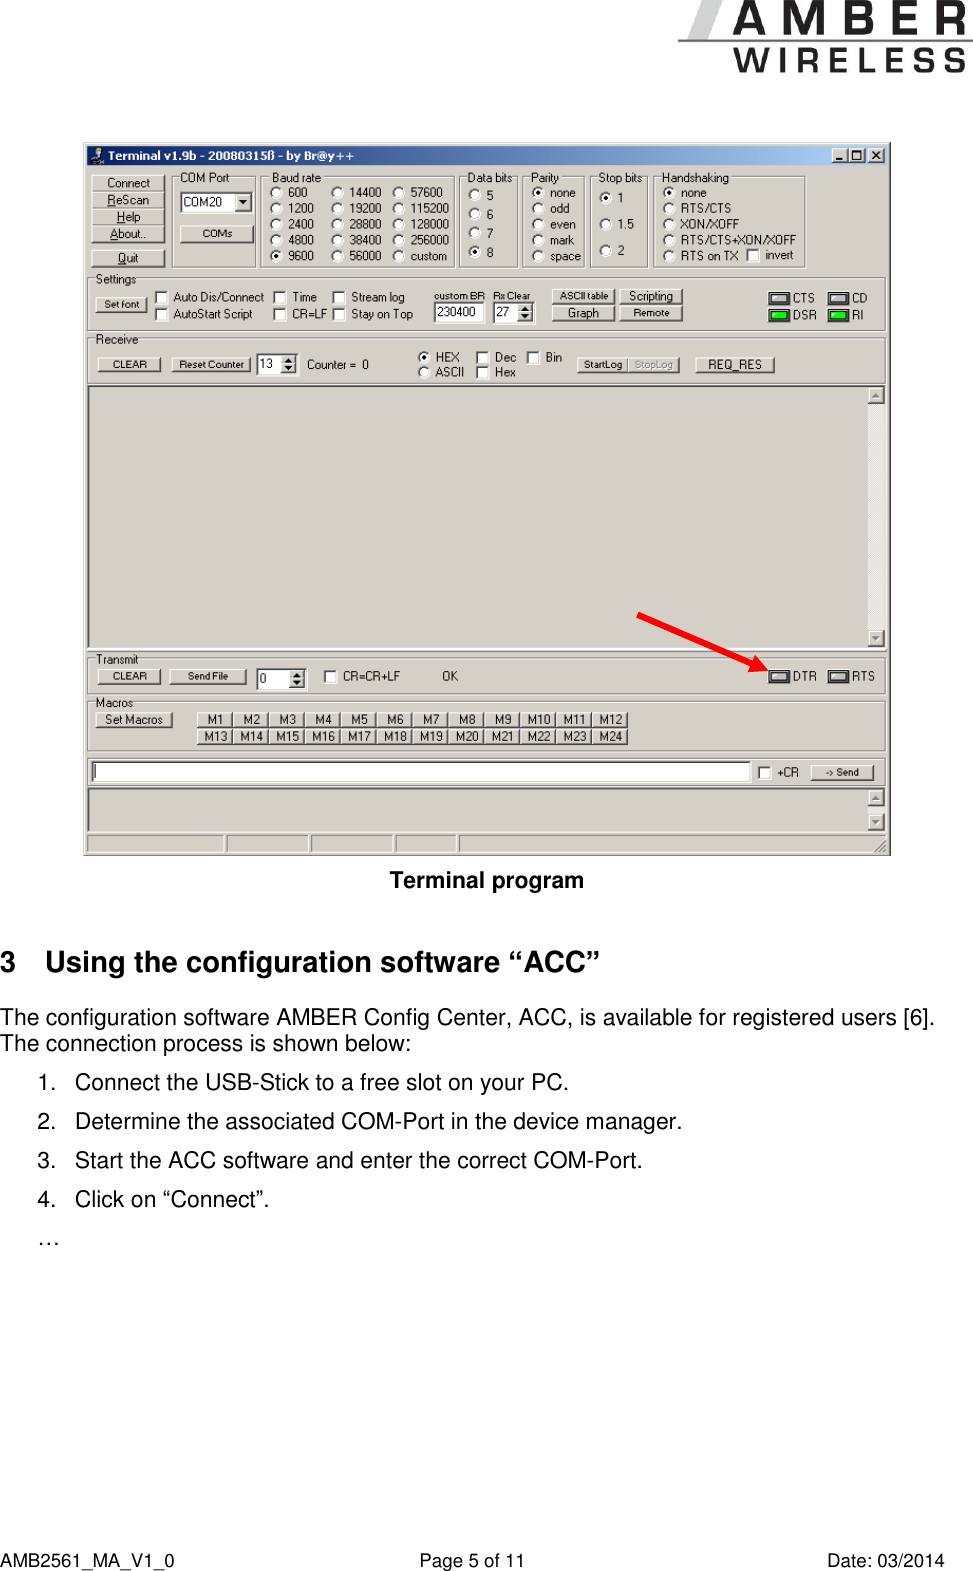      AMB2561_MA_V1_0  Page 5 of 11  Date: 03/2014  Terminal program  3  Using the configuration software “ACC” The configuration software AMBER Config Center, ACC, is available for registered users [6]. The connection process is shown below: 1.  Connect the USB-Stick to a free slot on your PC. 2.  Determine the associated COM-Port in the device manager. 3.  Start the ACC software and enter the correct COM-Port. 4.  Click on “Connect”. … 